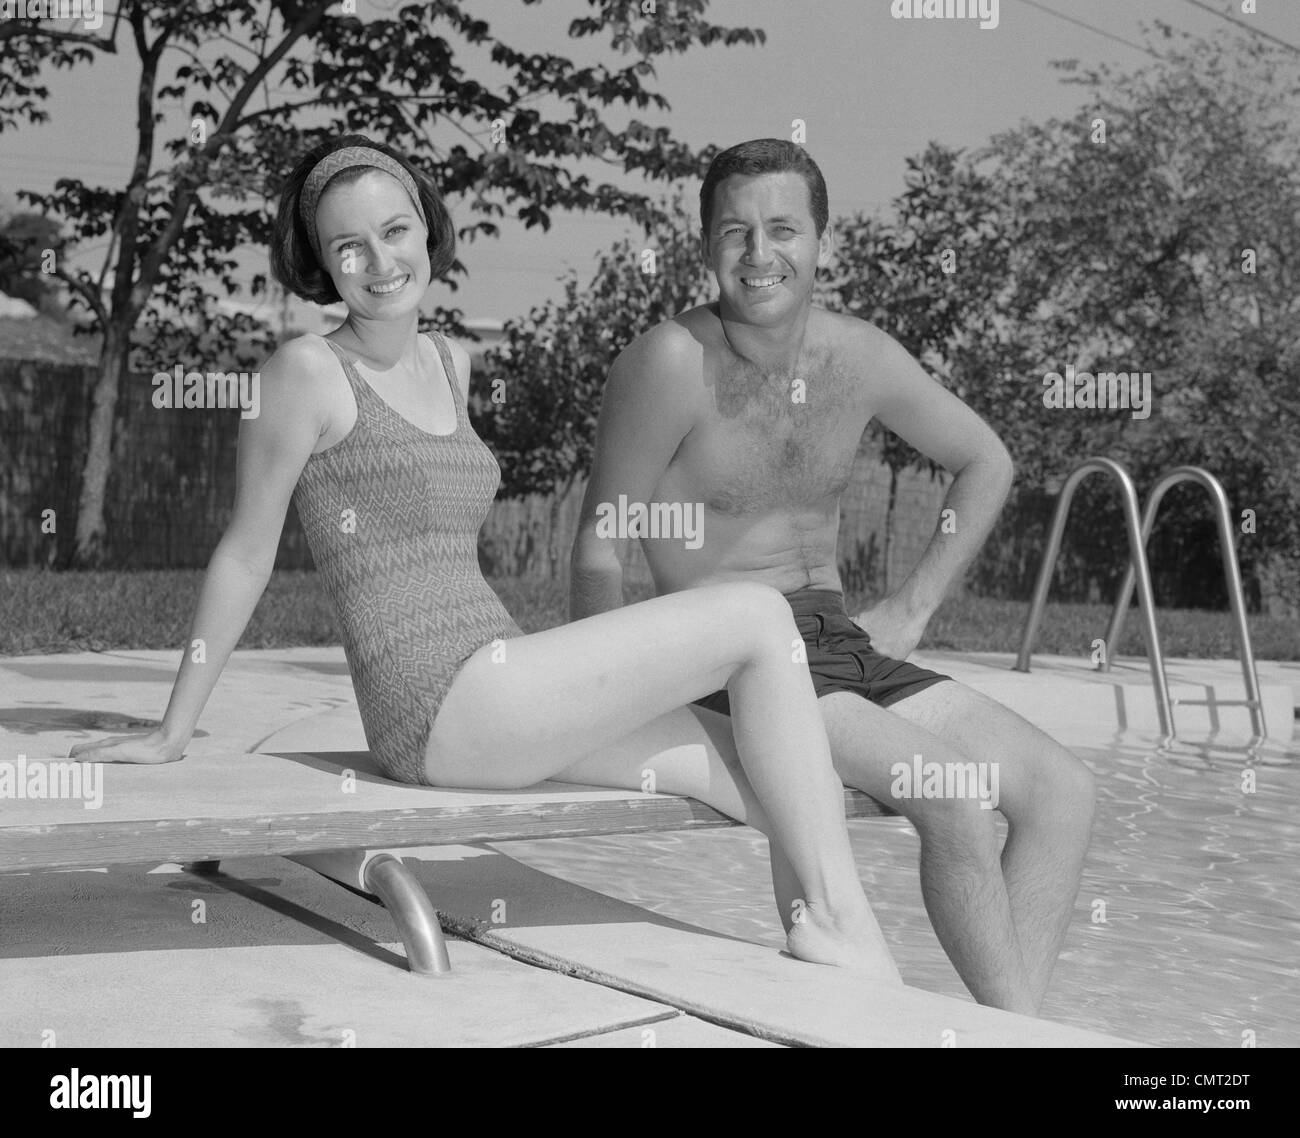 1960s MAN WOMAN COUPLE SITTING ON DIVING BOARD ON SIDE OF SWIMMING POOL Stock Photo